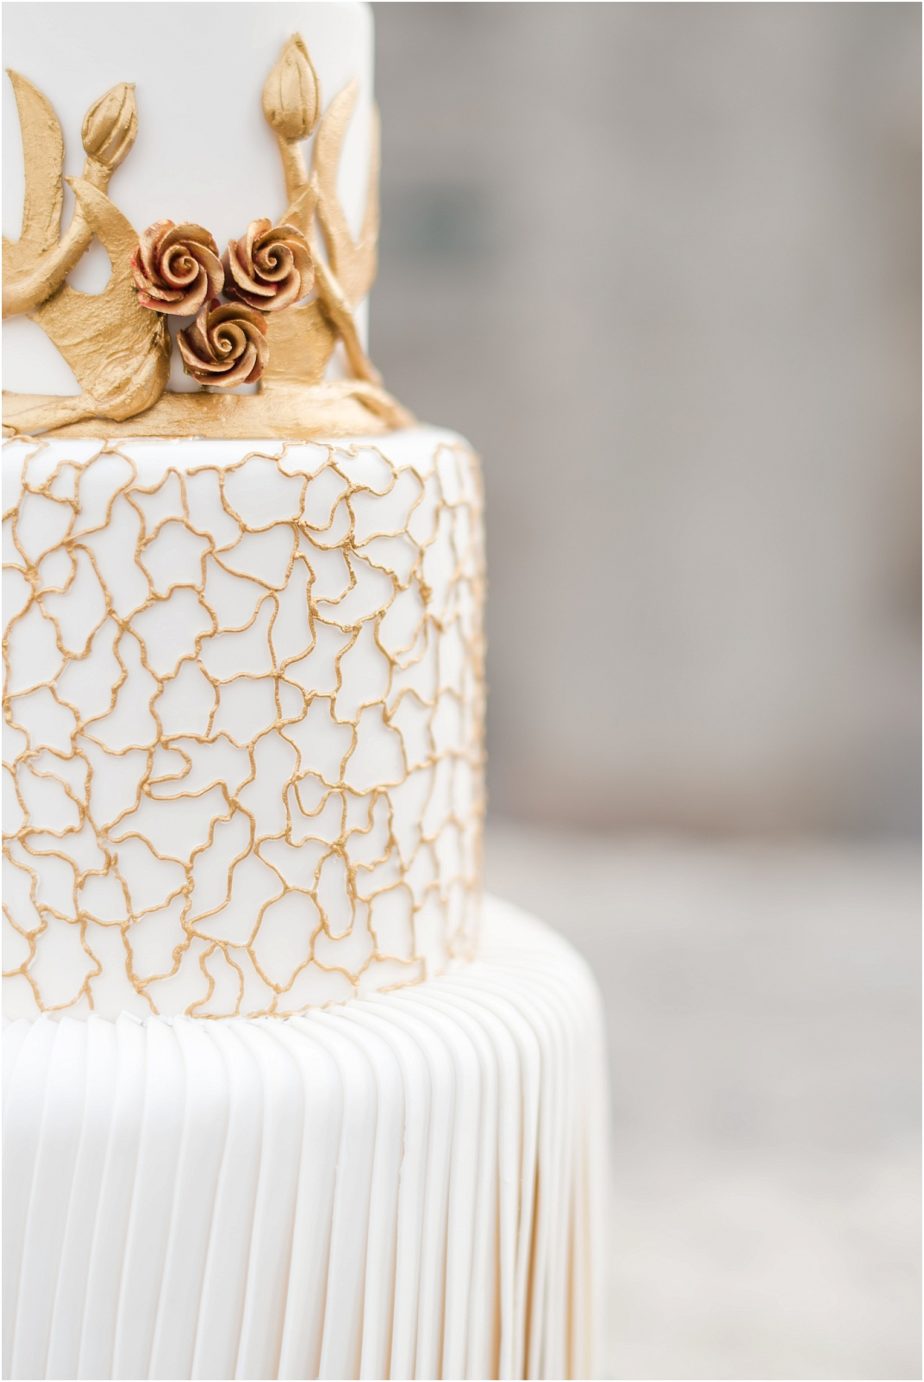 Game of Thrones wedding inspiration Goldendale WA Styled Shoot wedding cake with gold marble